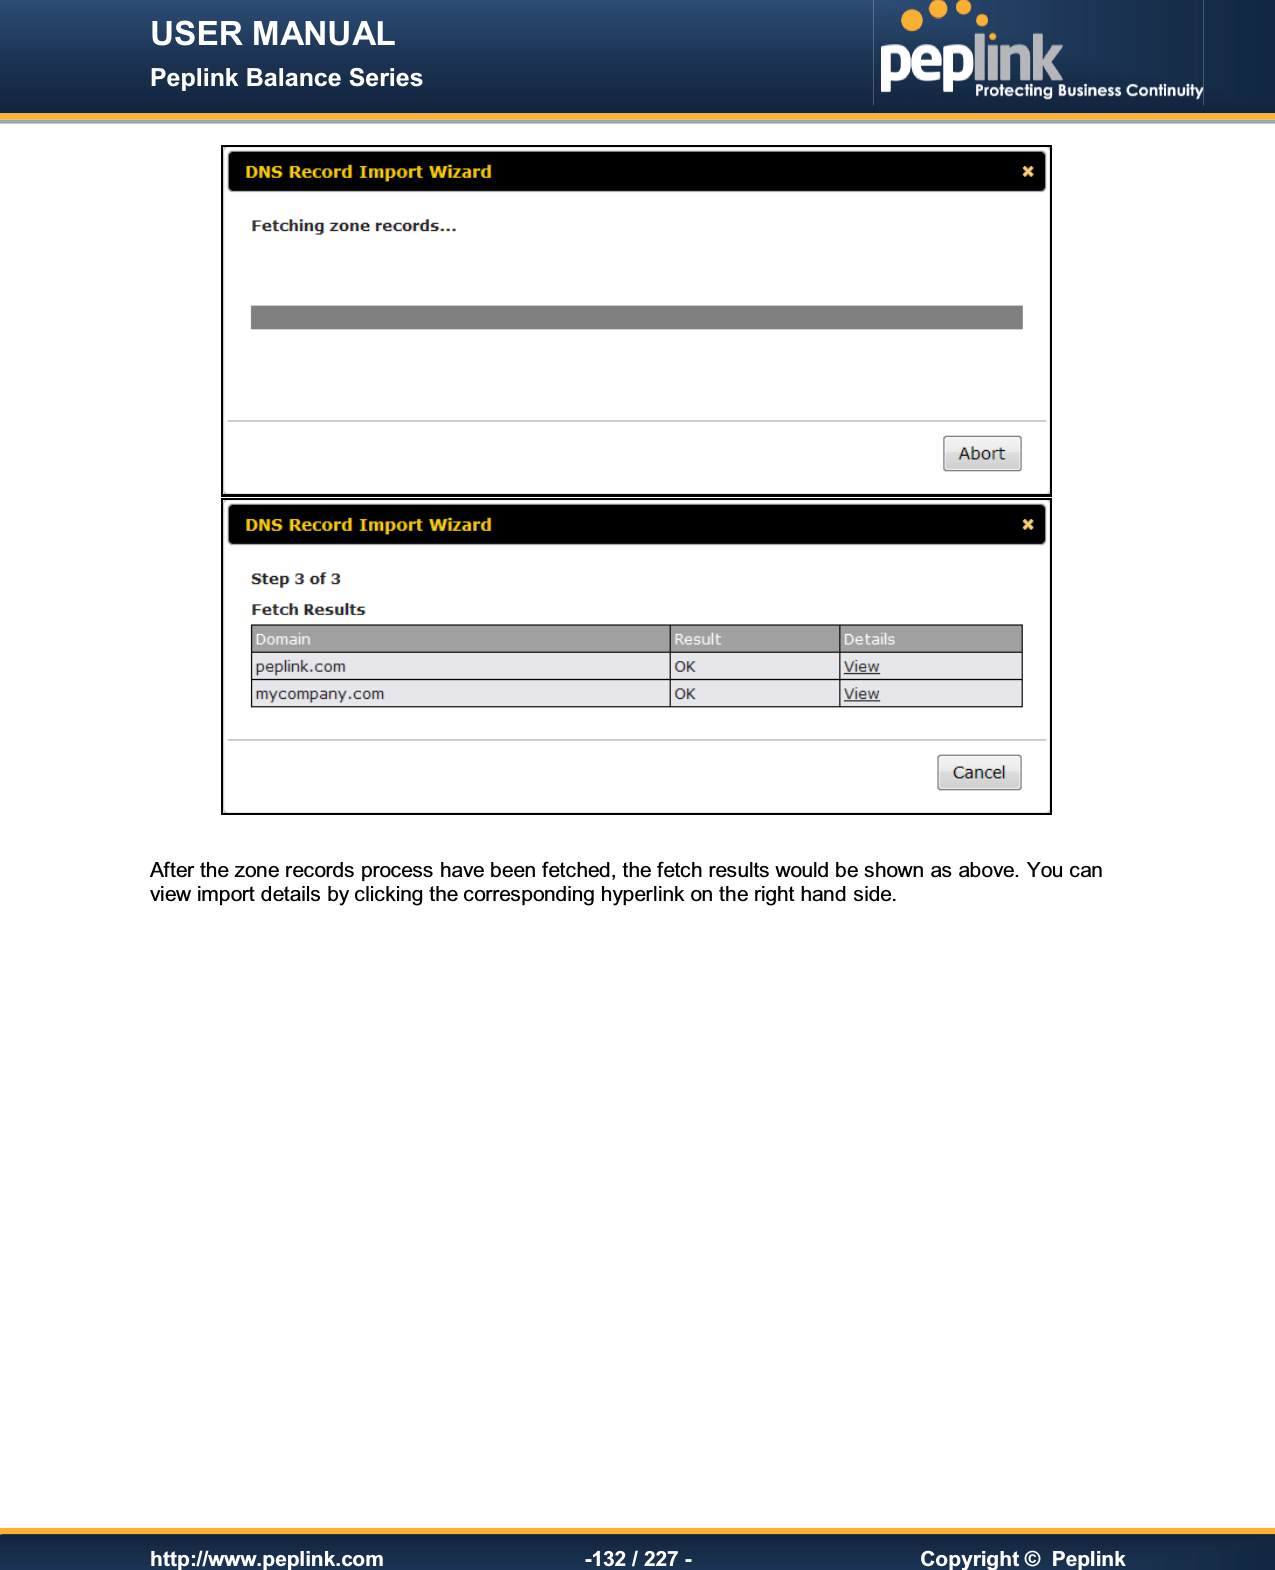 USER MANUAL Peplink Balance Series   http://www.peplink.com -132 / 227 -  Copyright ©  Peplink    After the zone records process have been fetched, the fetch results would be shown as above. You can view import details by clicking the corresponding hyperlink on the right hand side.  